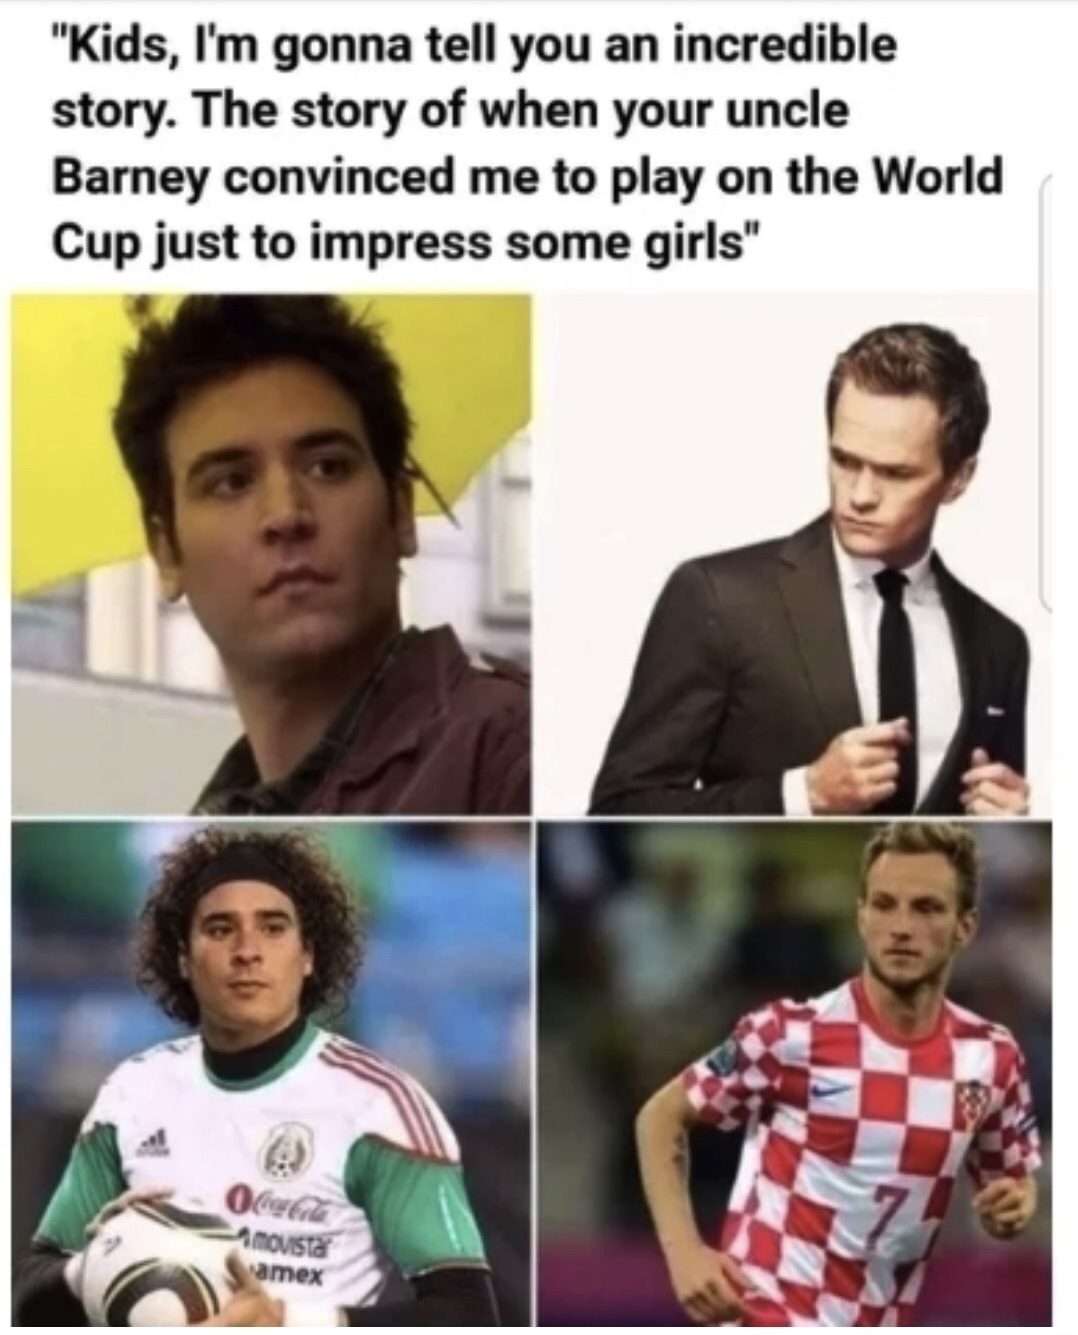 sad i stop being sad - "Kids, I'm gonna tell you an incredible story. The story of when your uncle Barney convinced me to play on the World Cup just to impress some girls" movistar Namex